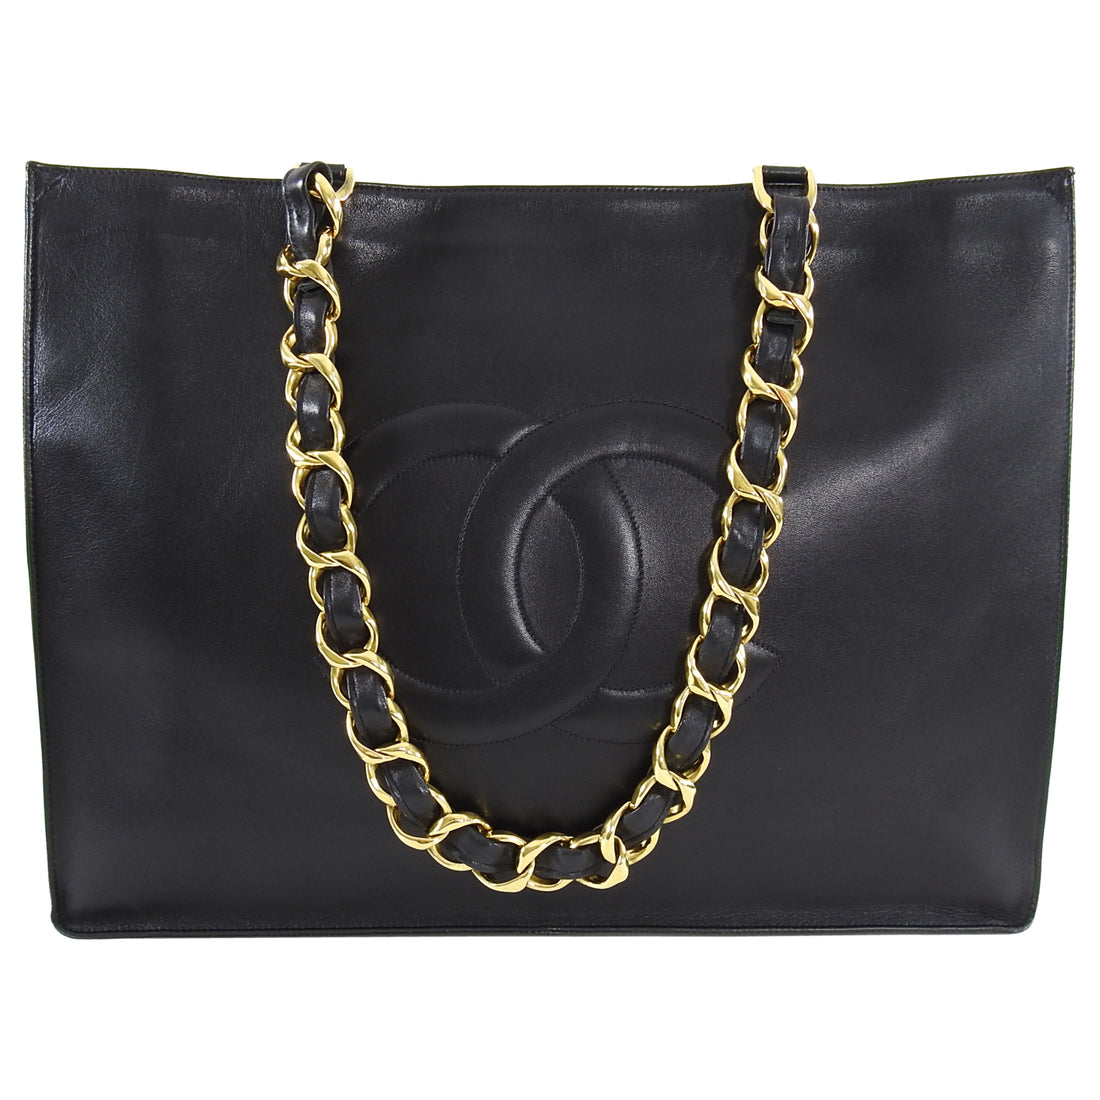 Chanel Vintage 1994 XL Lambskin CC Tote Bag with Chain Straps